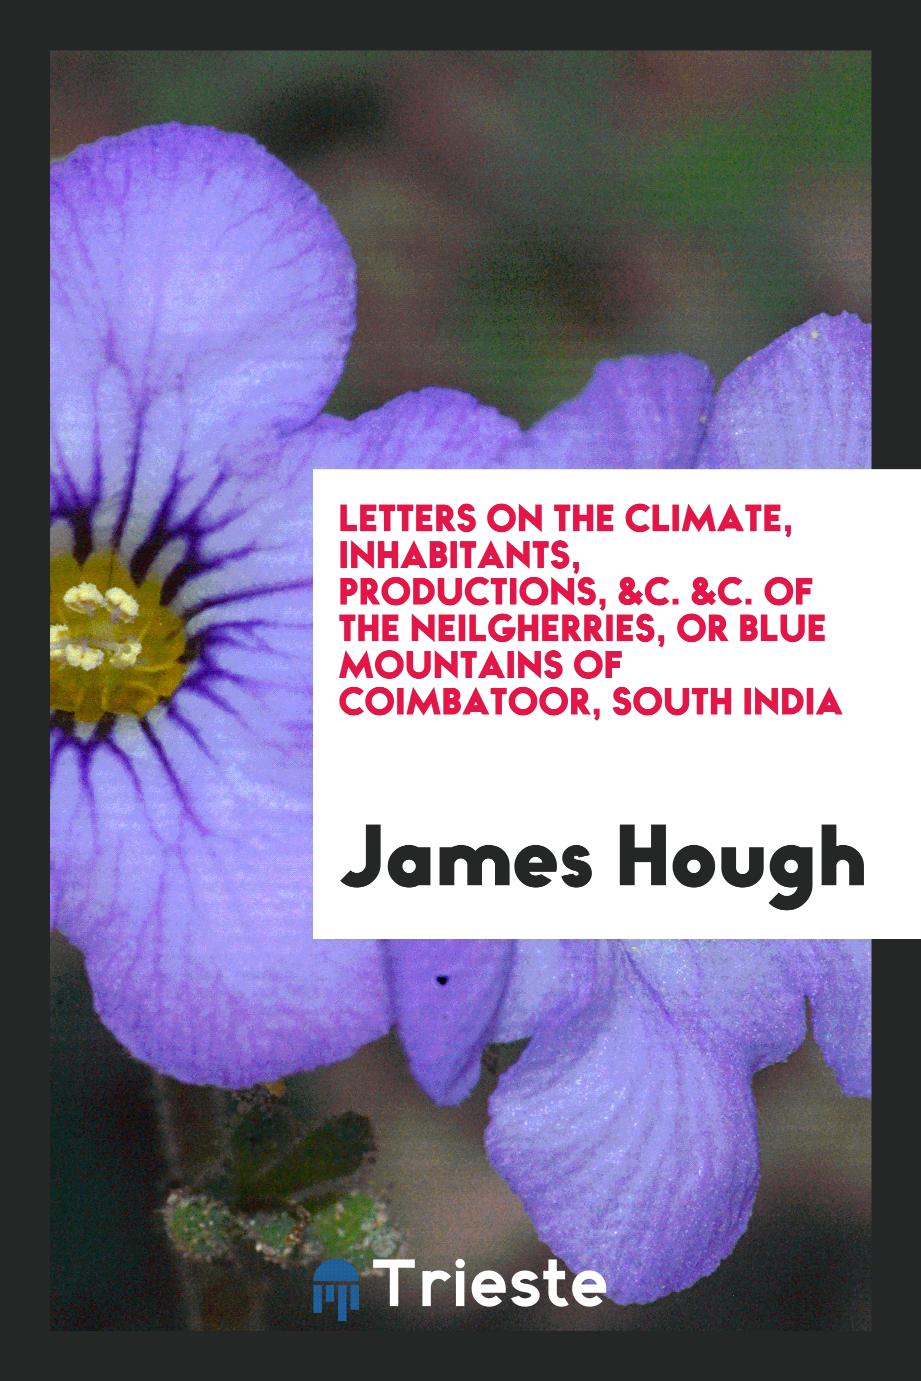 Letters on the Climate, Inhabitants, Productions, &c. &c. of the Neilgherries, or Blue Mountains of Coimbatoor, South India